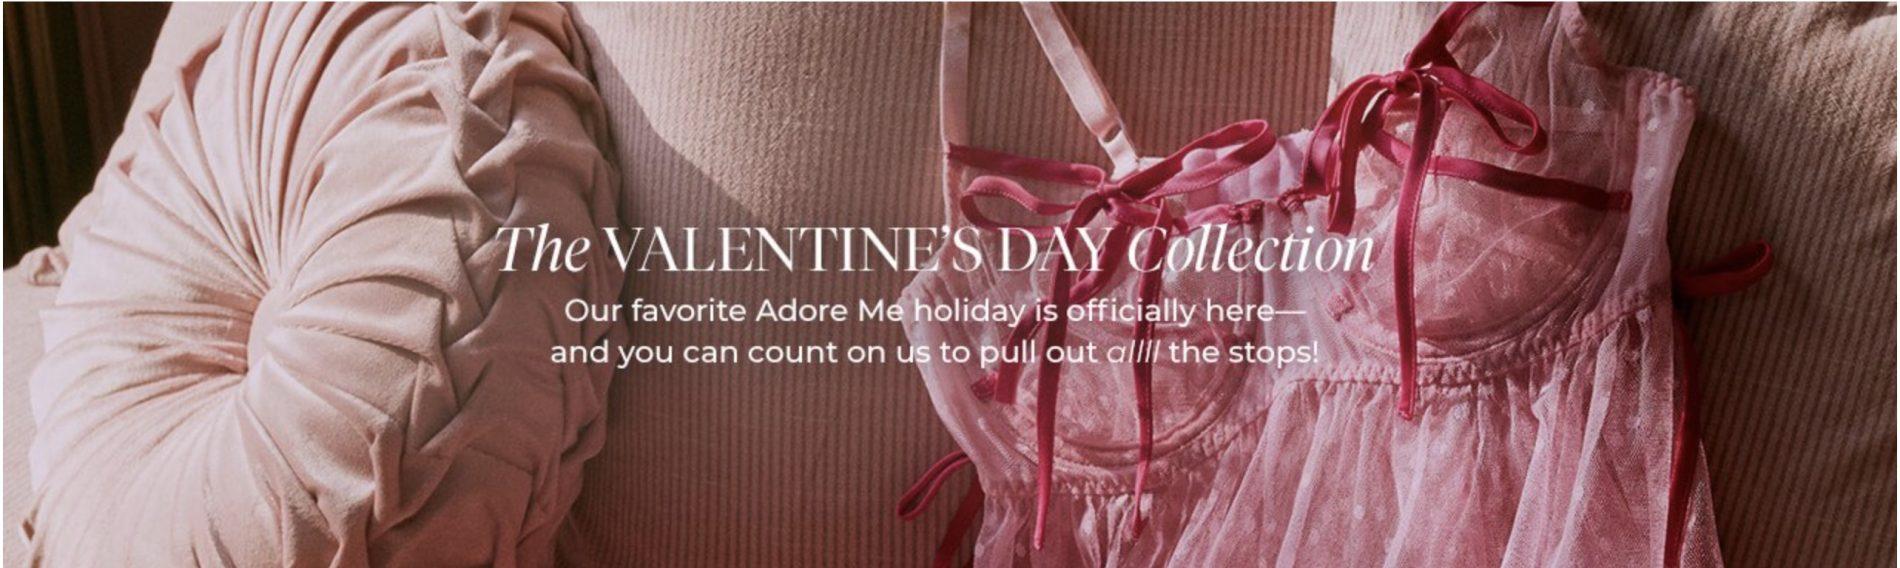 Adore Me February 2022 Selection Window Open + Coupon Code!